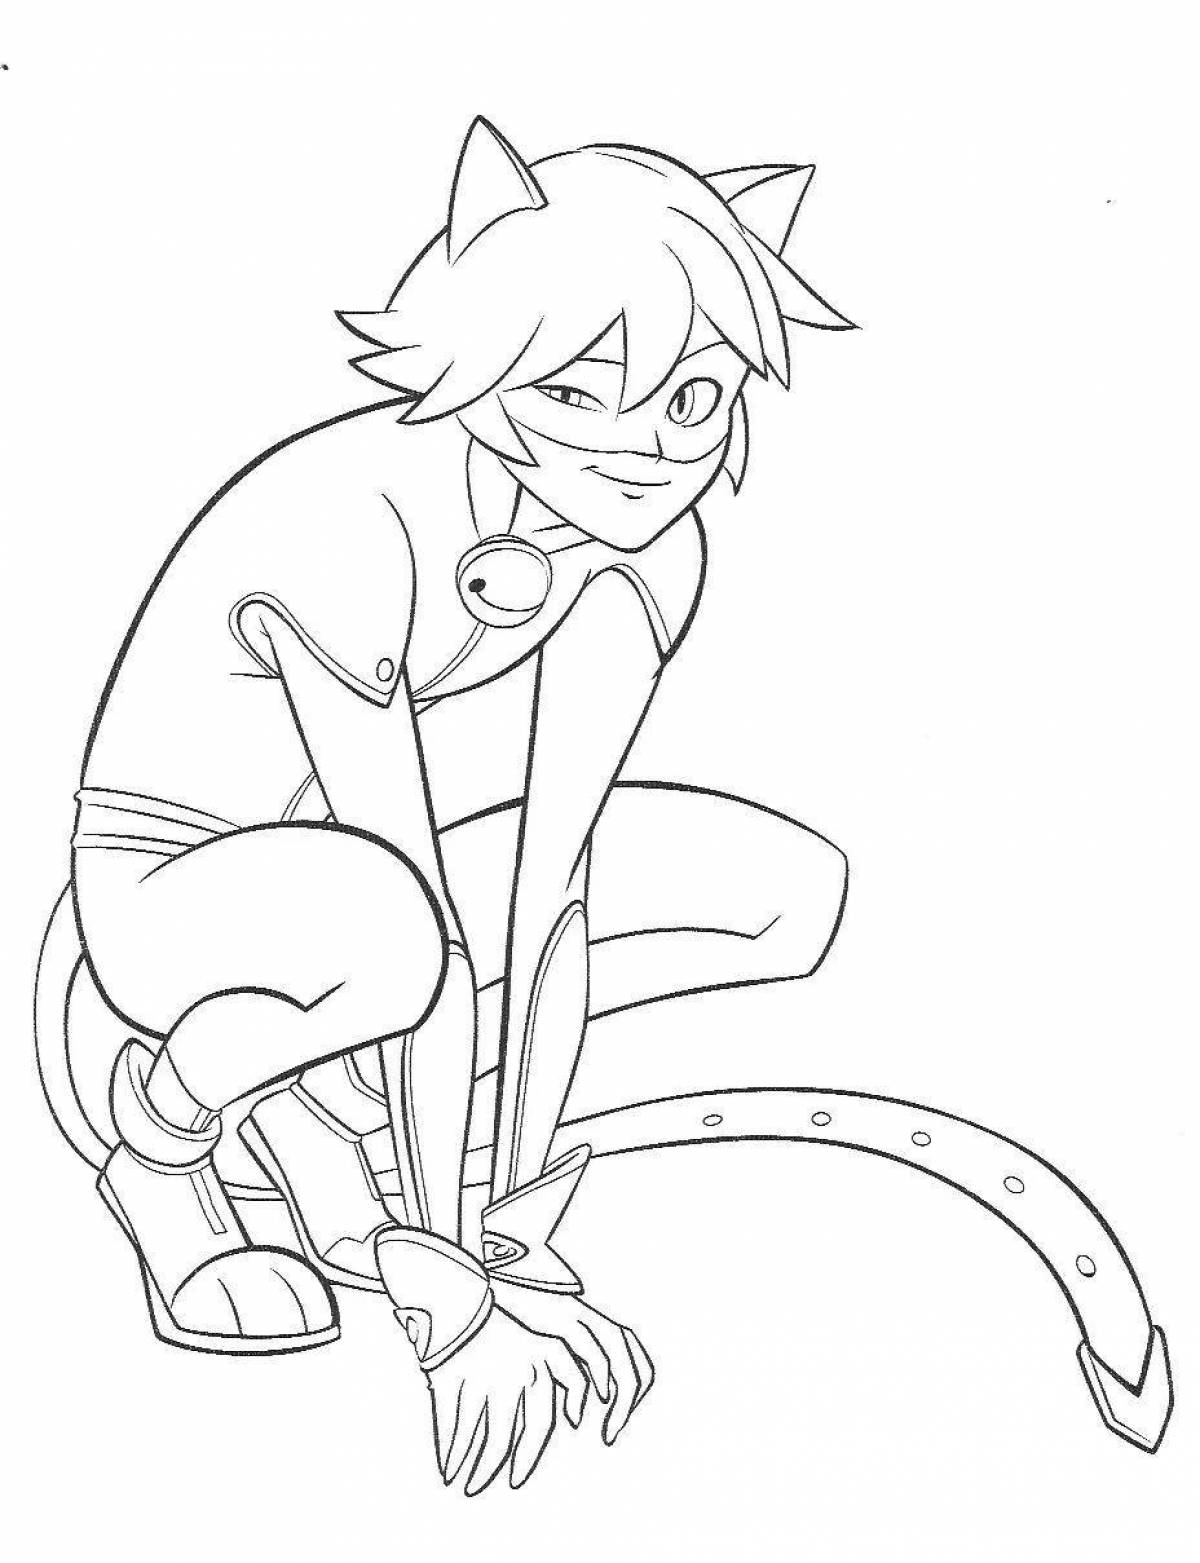 Charming drawing of ladybug and super cat